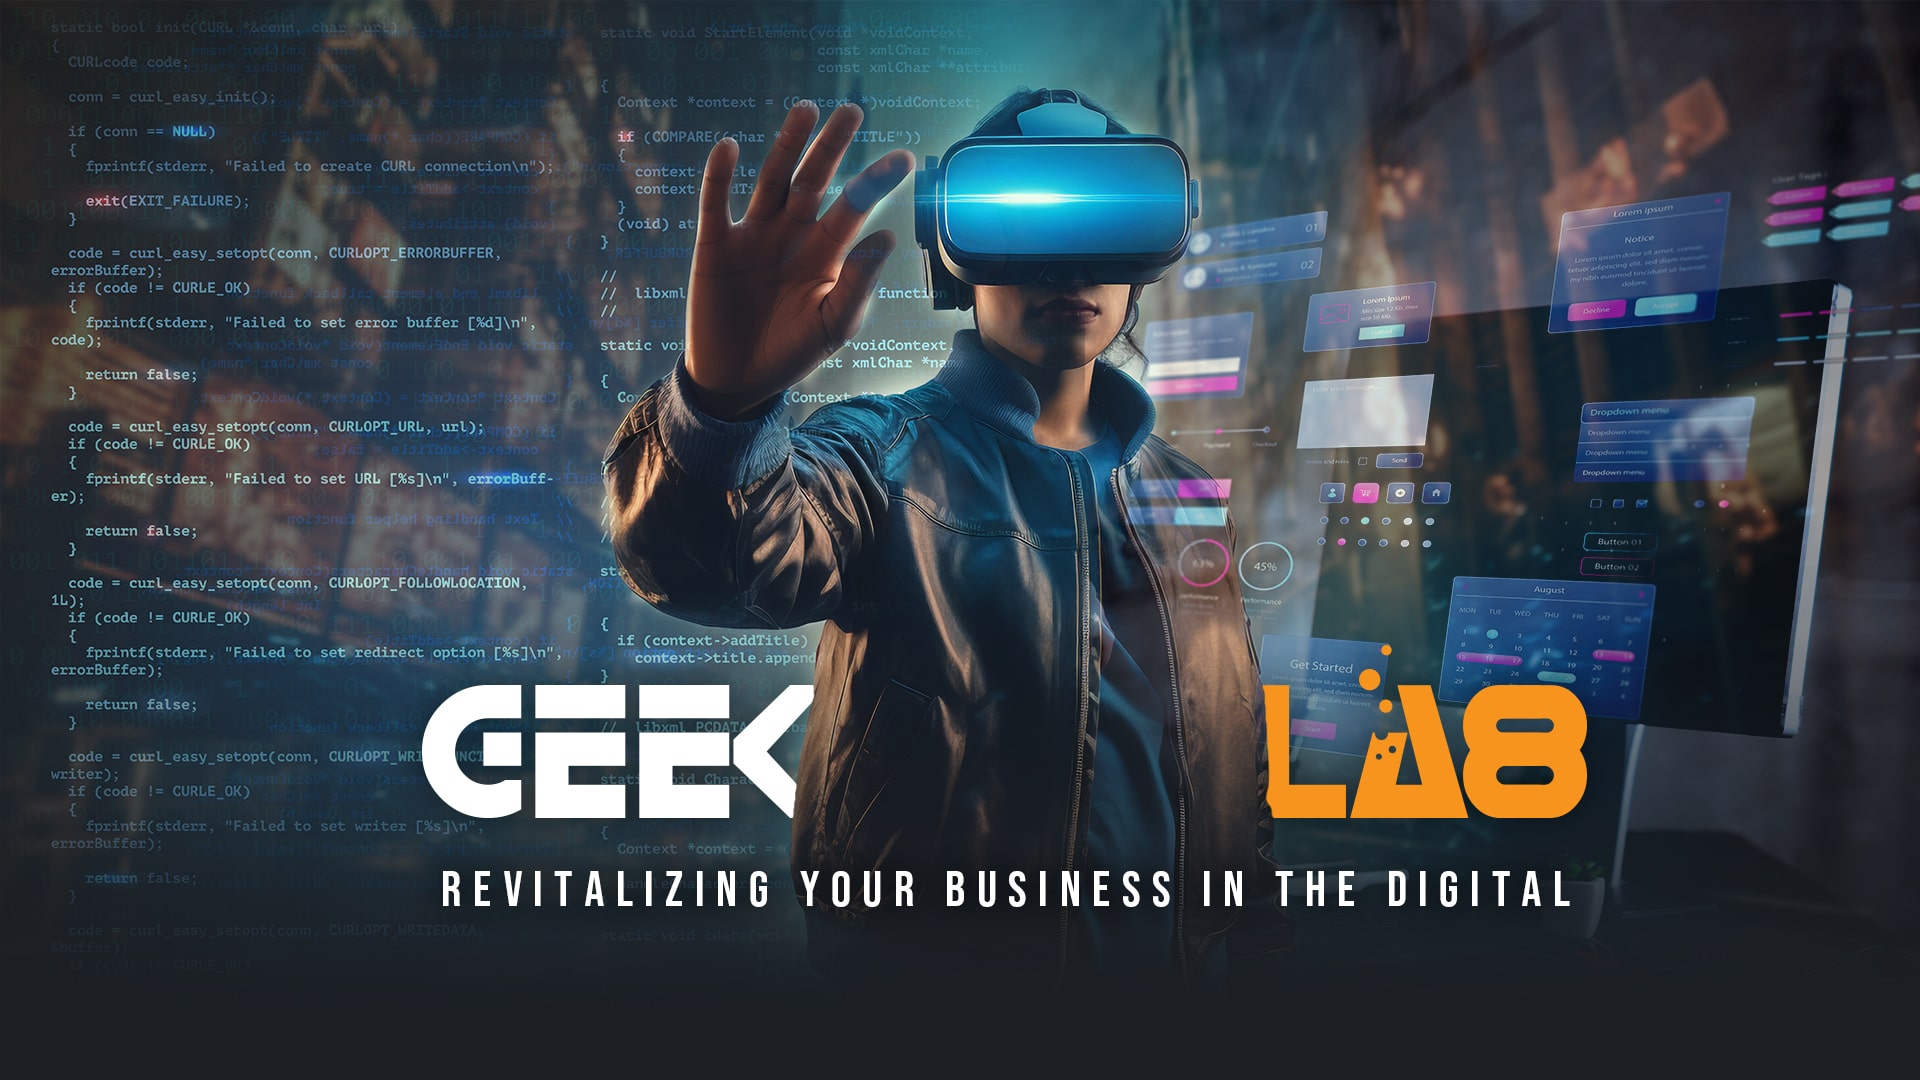 GeekLab - Revitalizing your business in the digital realm.